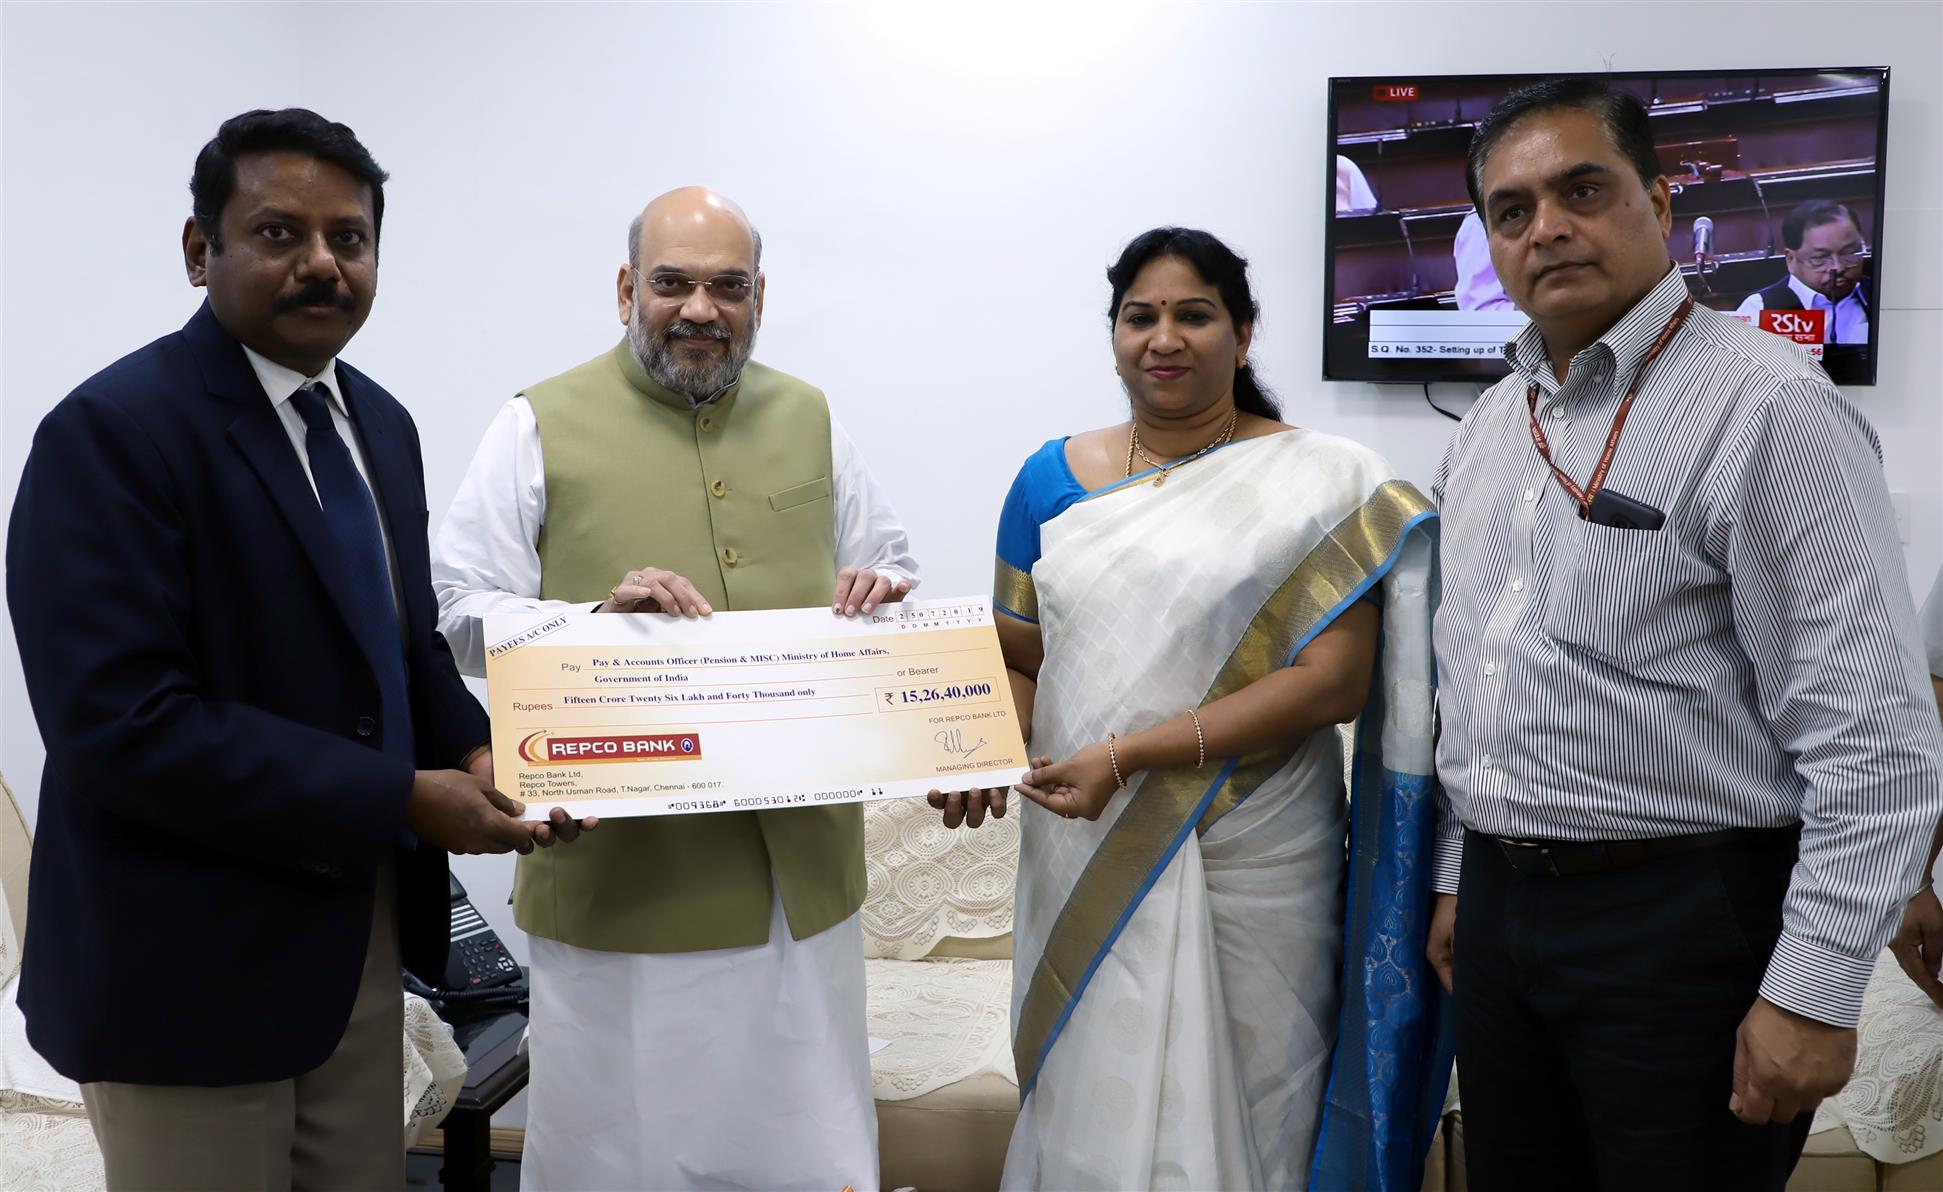 The Chairman, Repco Bank, Dr. P. Senthilkumar and the Managing Director, Repco Bank, Smt. R.S. Isabella presenting a dividend cheque for FY 2018-19 to the Union Home Minister, Shri Amit Shah, in New Delhi on July 25, 2019.